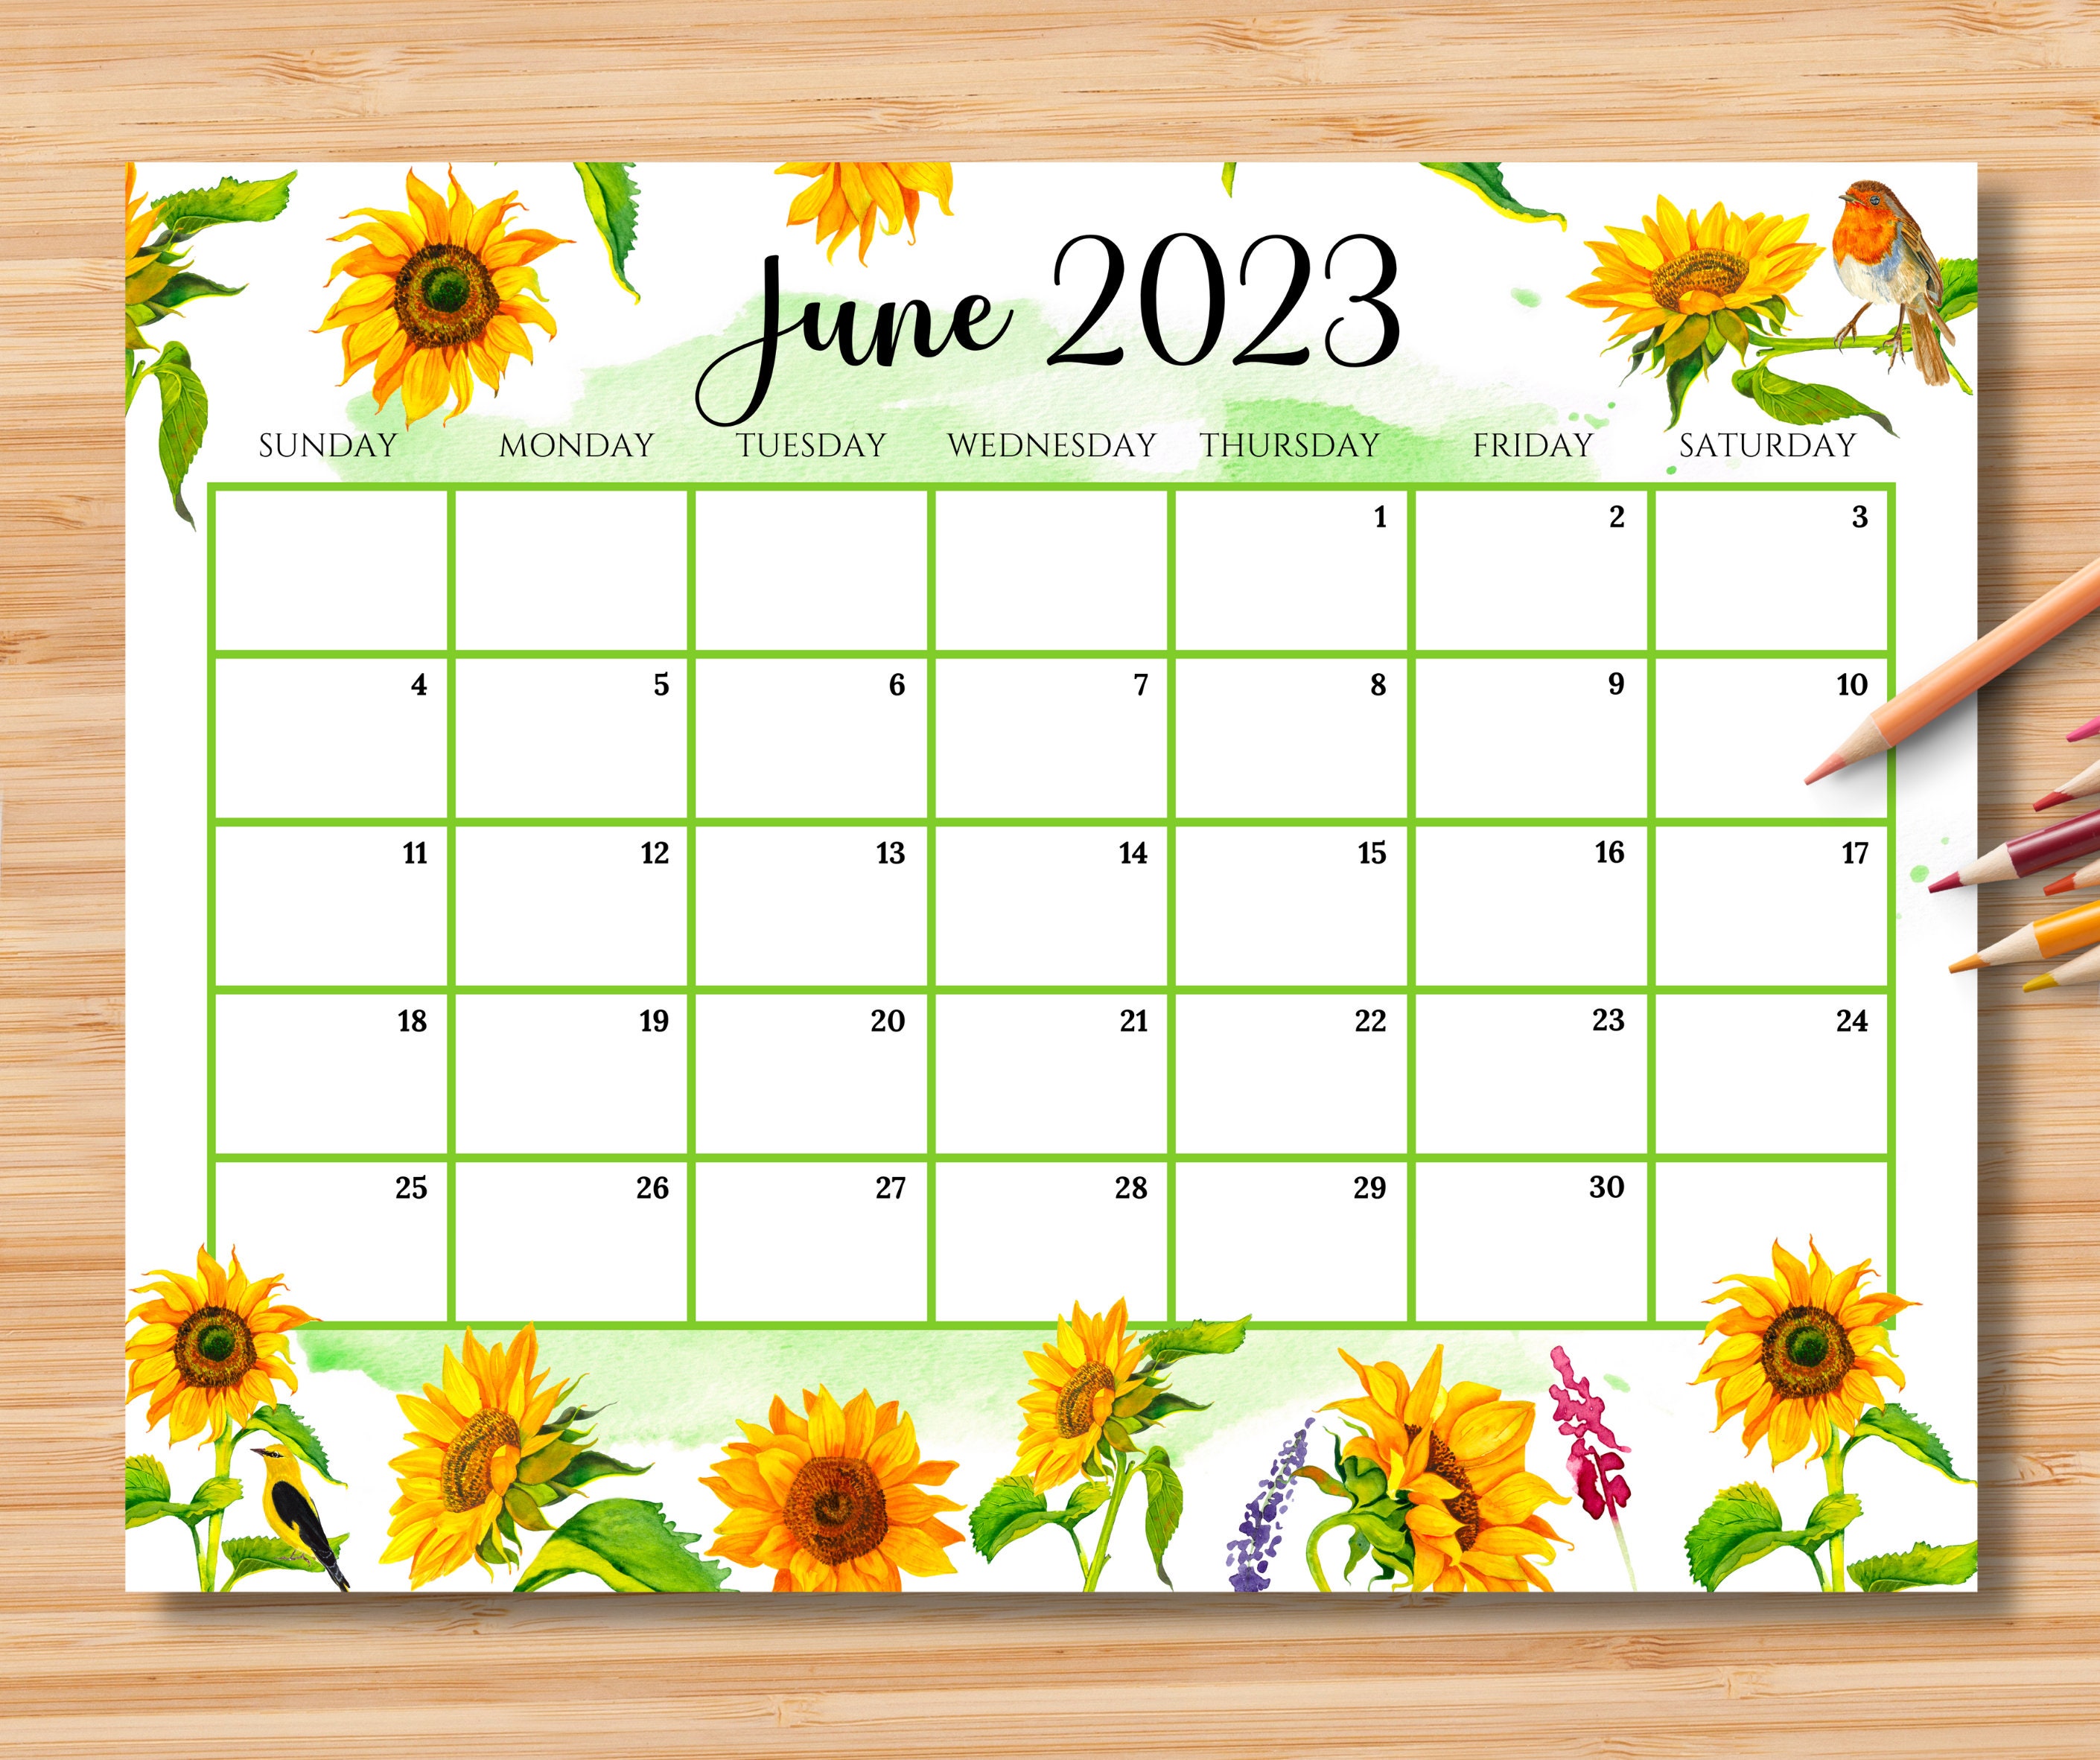 Free Printable Calendar June 2023 With Lines